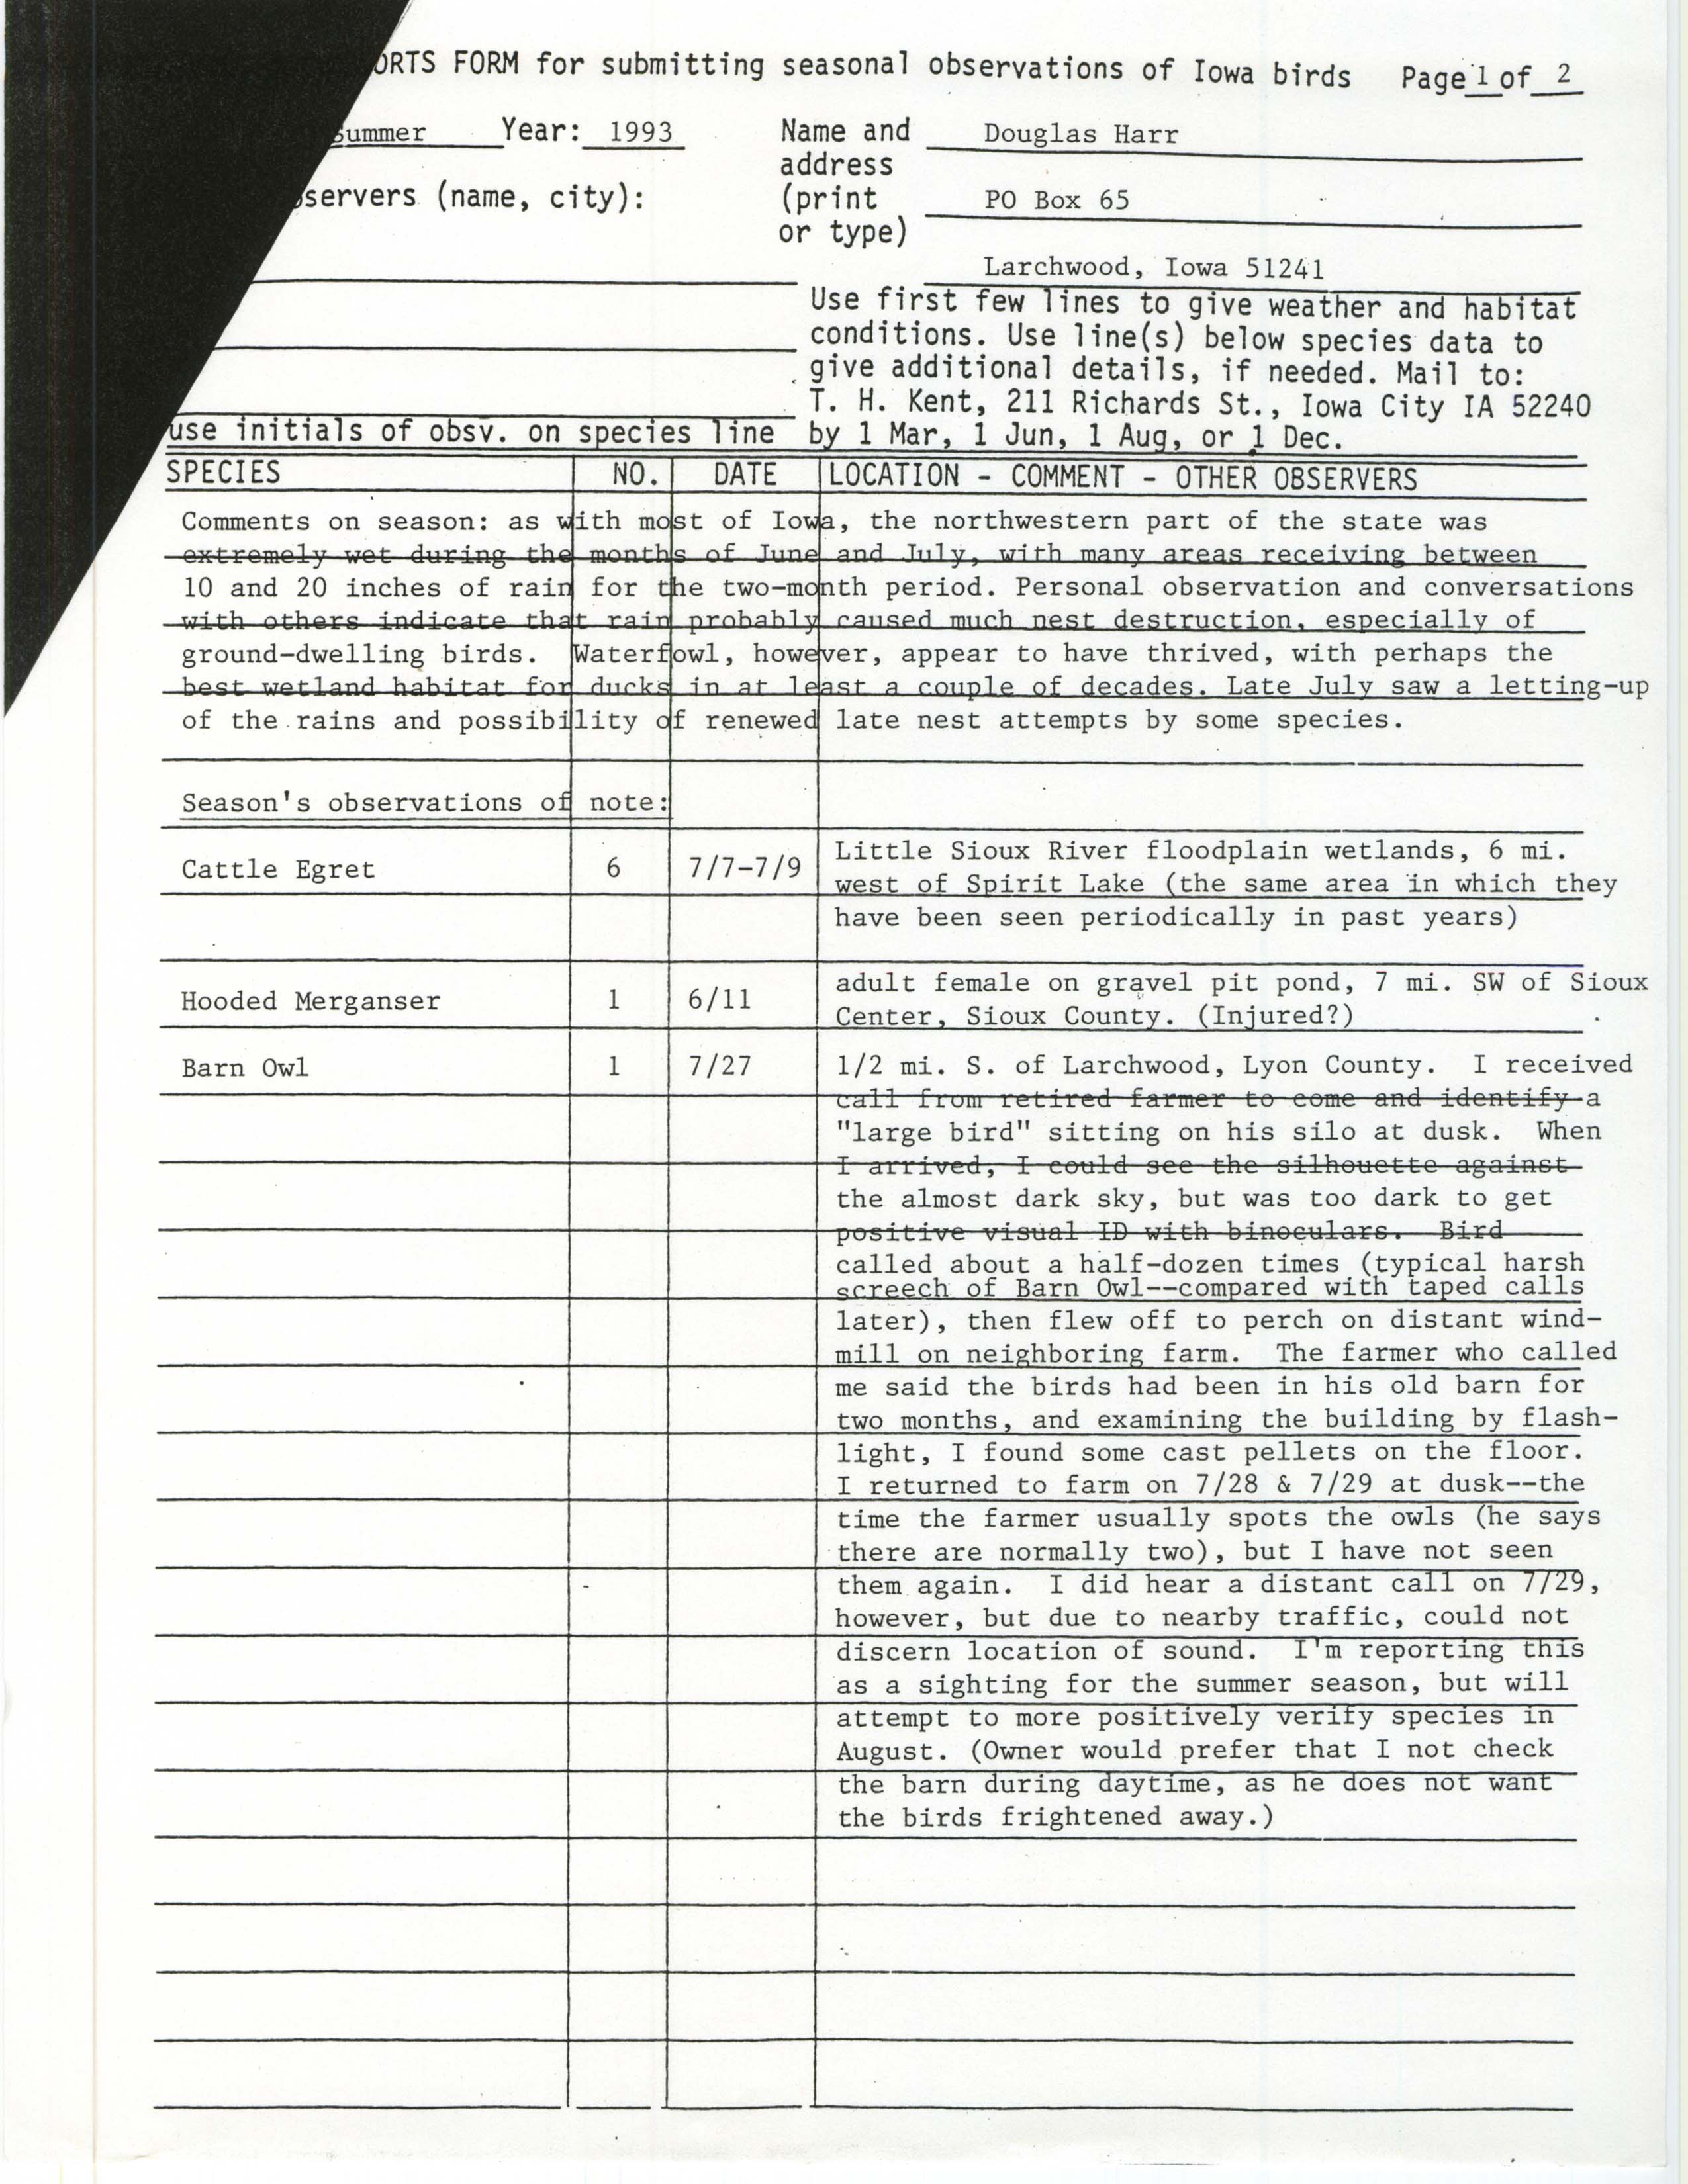 Field reports form for submitting seasonal observations of Iowa birds, summer 1993, Douglas Harr